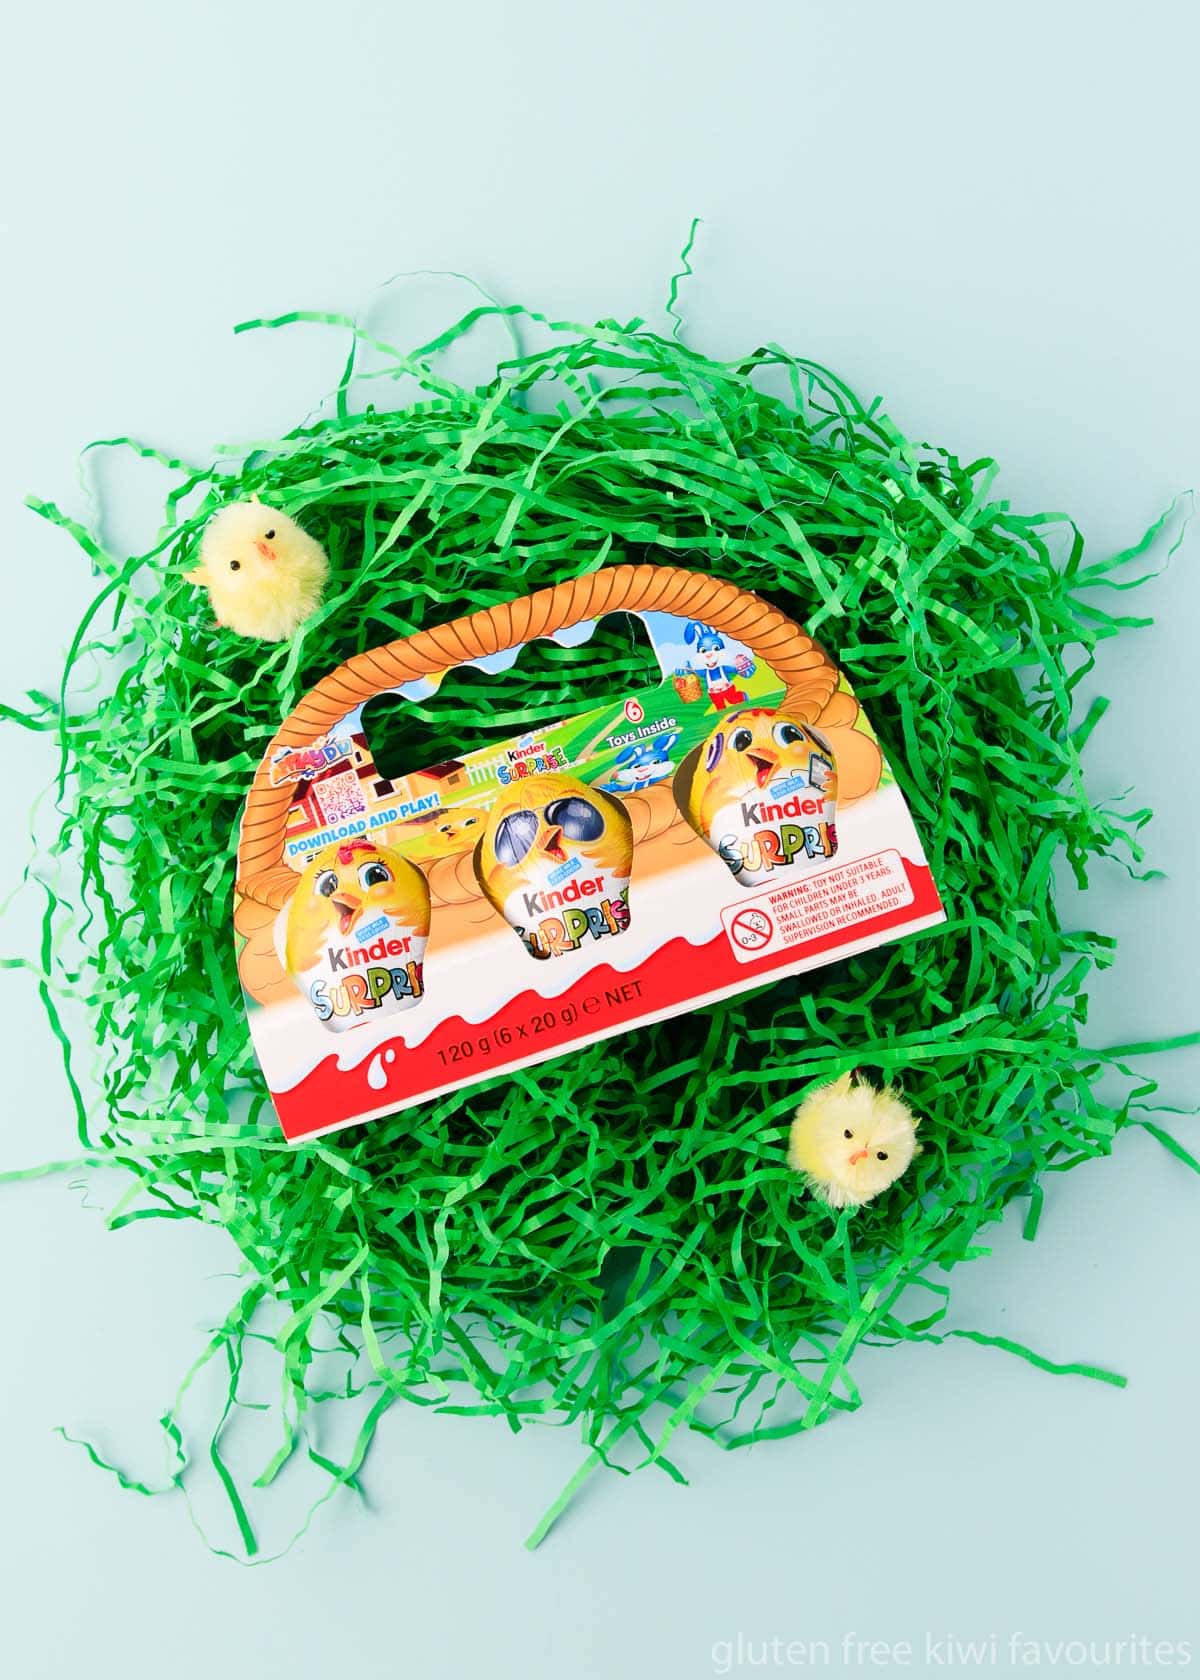 A 3-pack of Kinder Surprise Easter eggs, on a nest of green shredded paper.